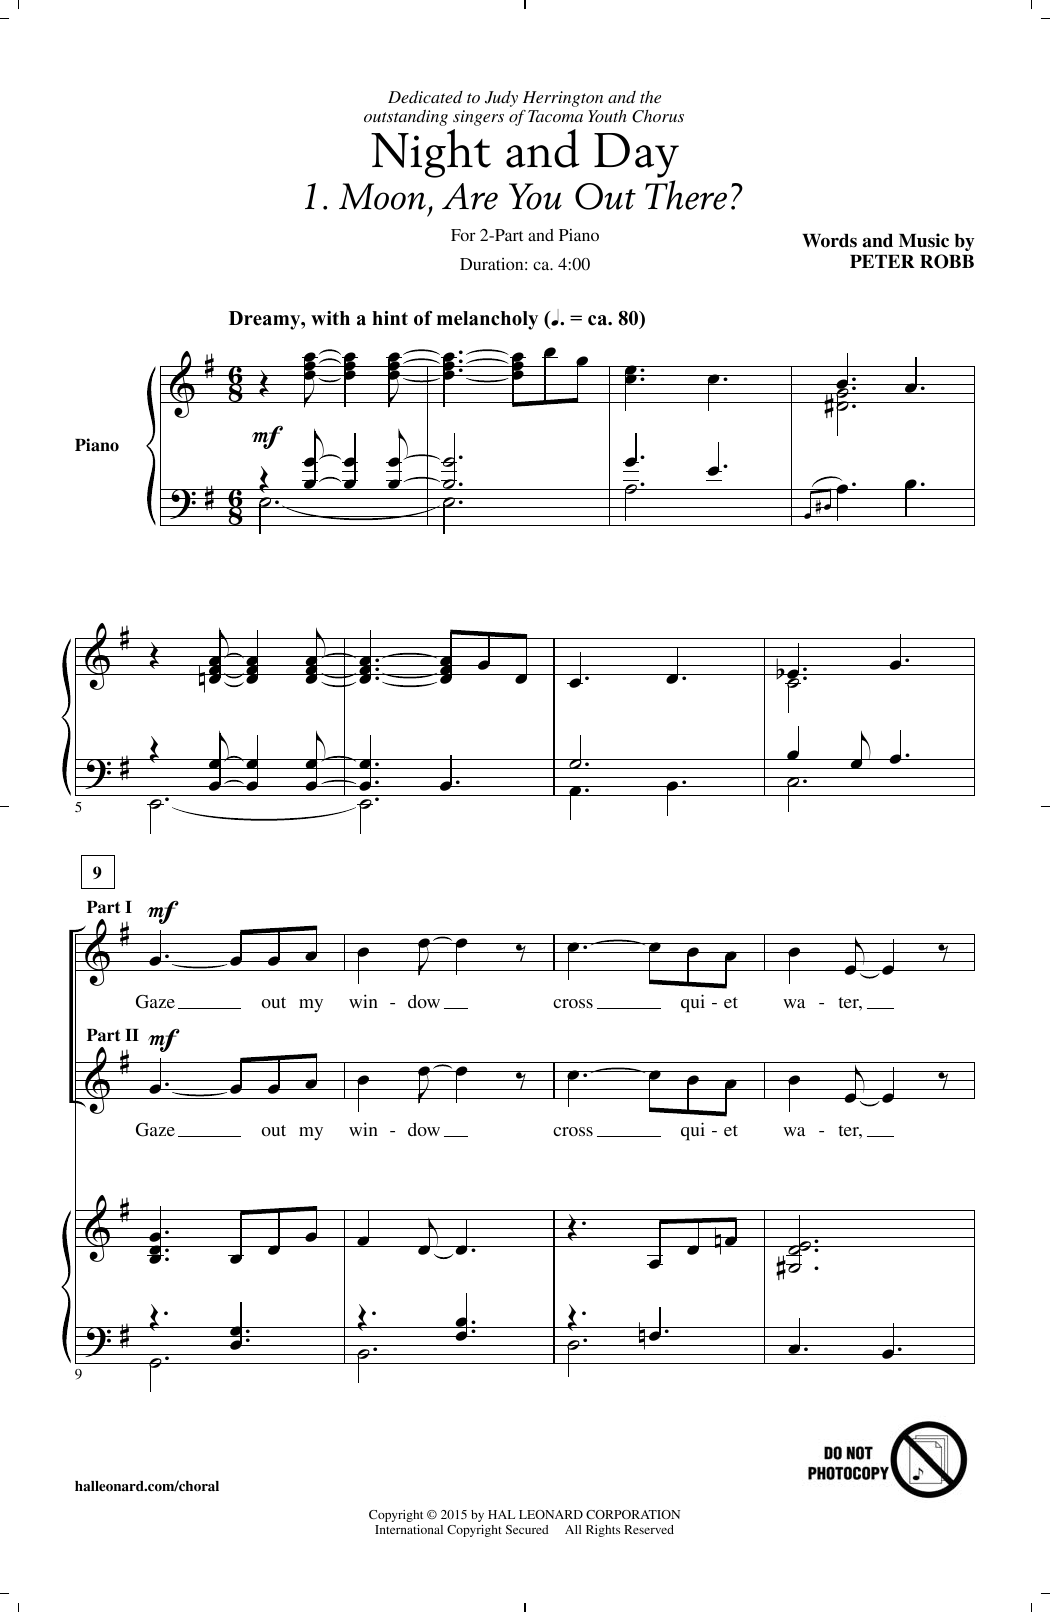 Download Peter Robb Night And Day Sheet Music